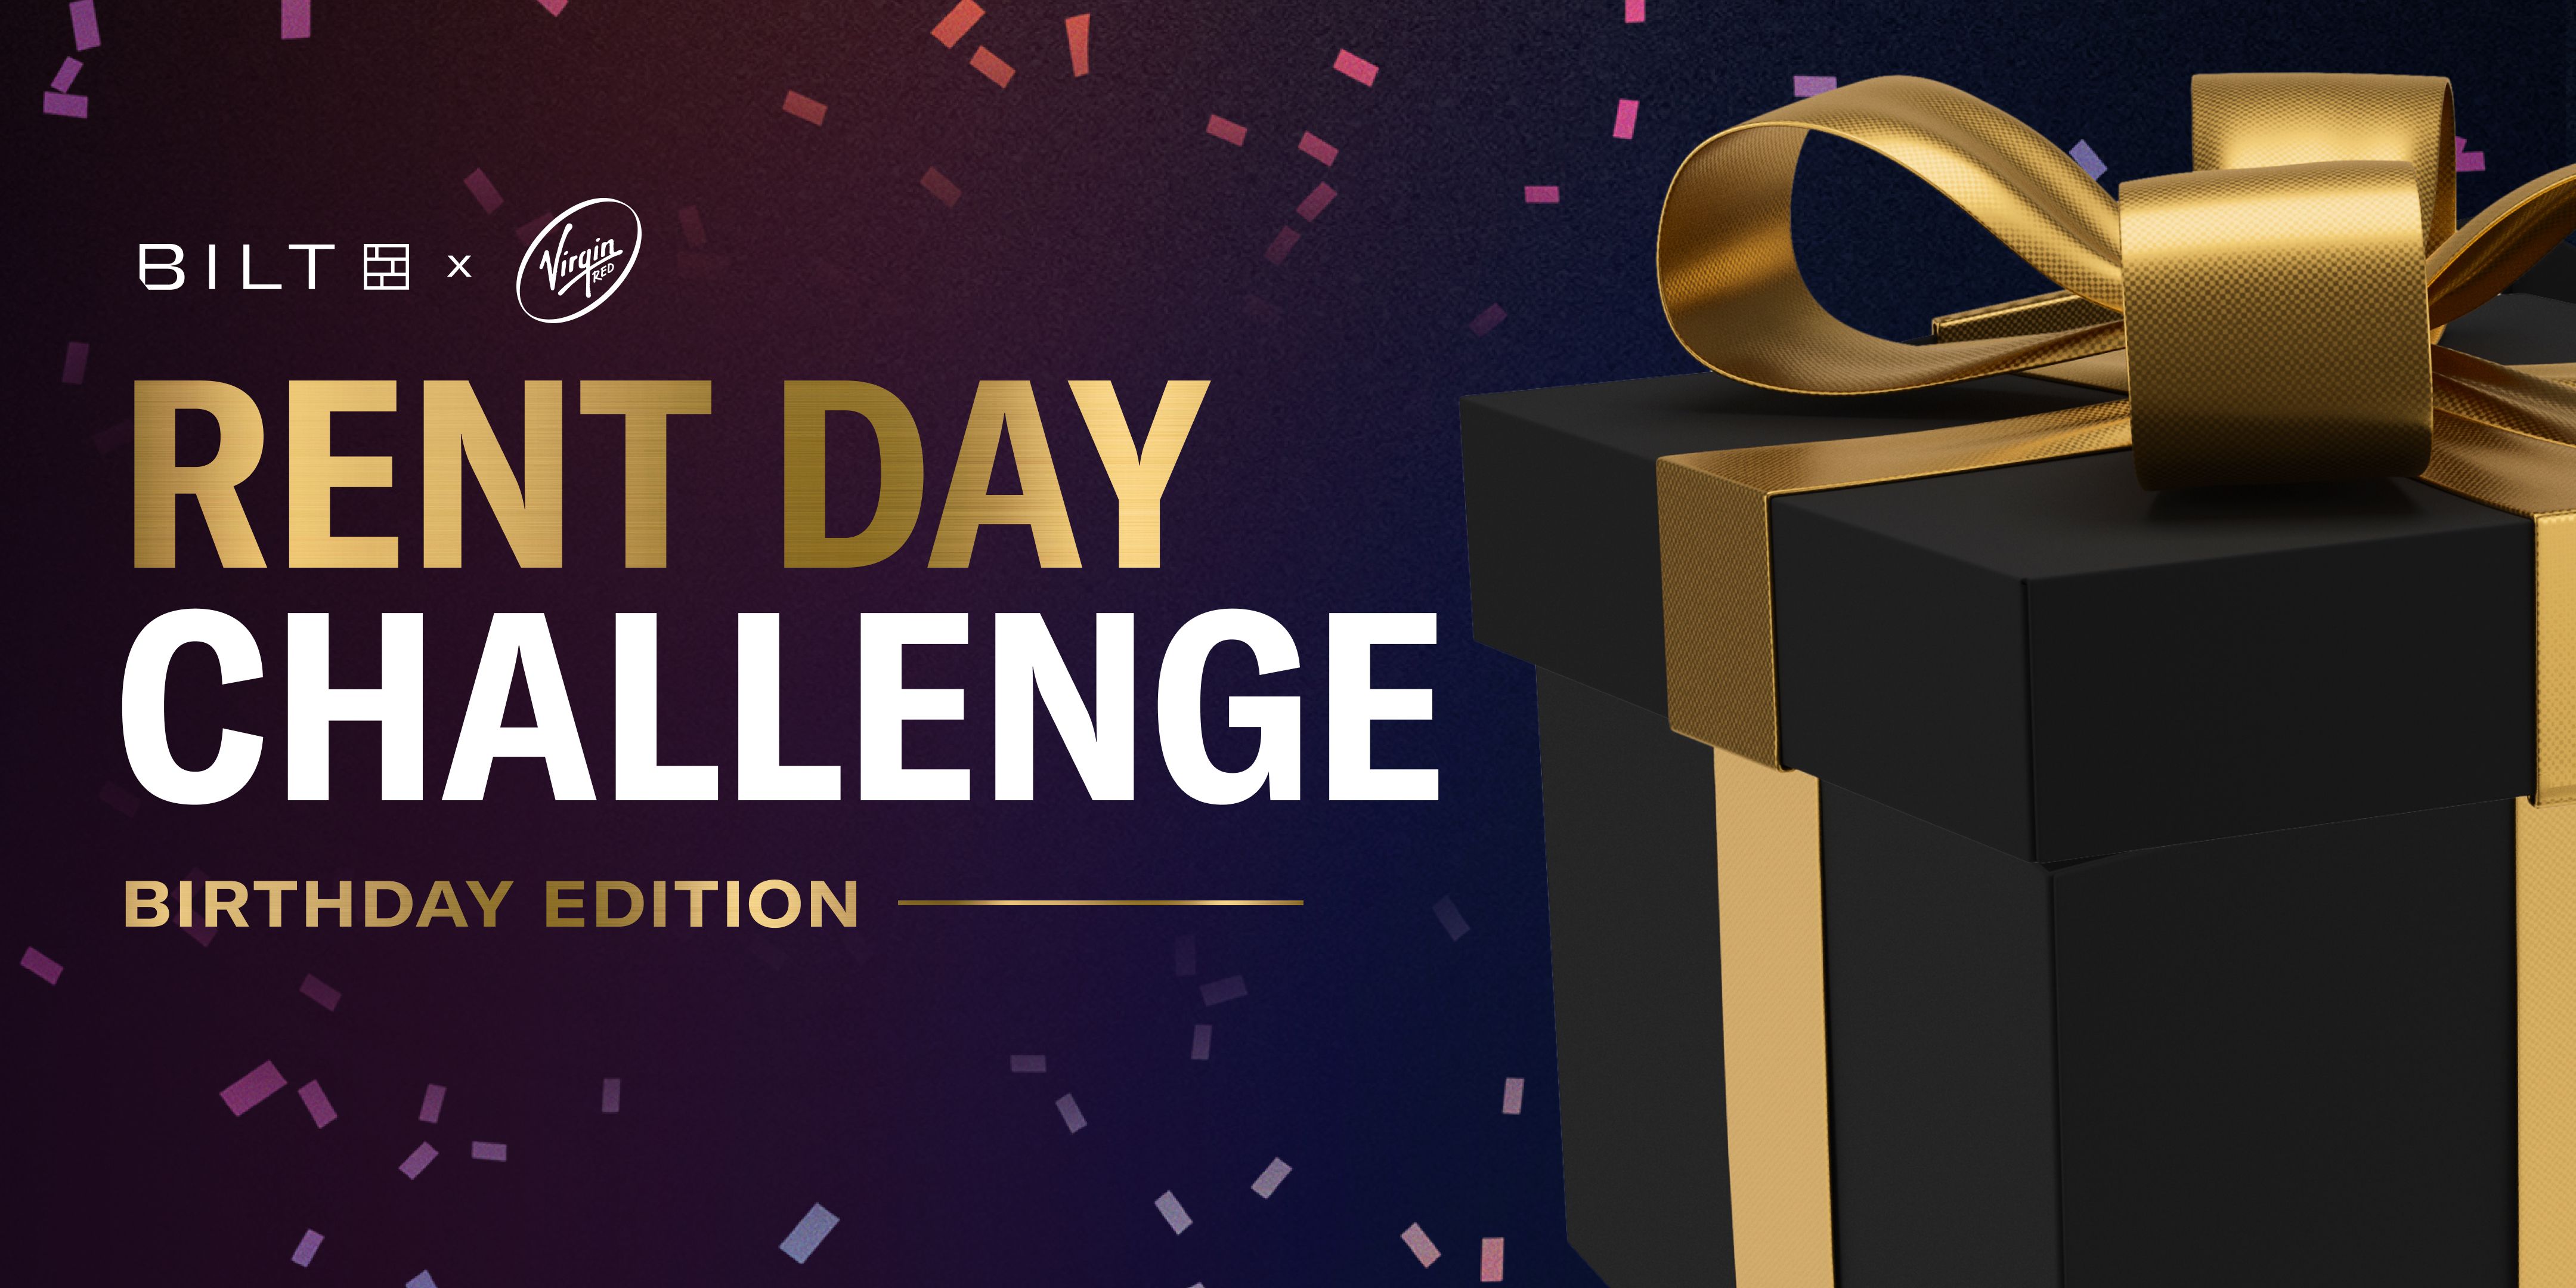 BILT Mastercard: The Rent Day Challenge for Prizes + Double Points on Dining, Travel, and Other Spend (Excluding Rent)